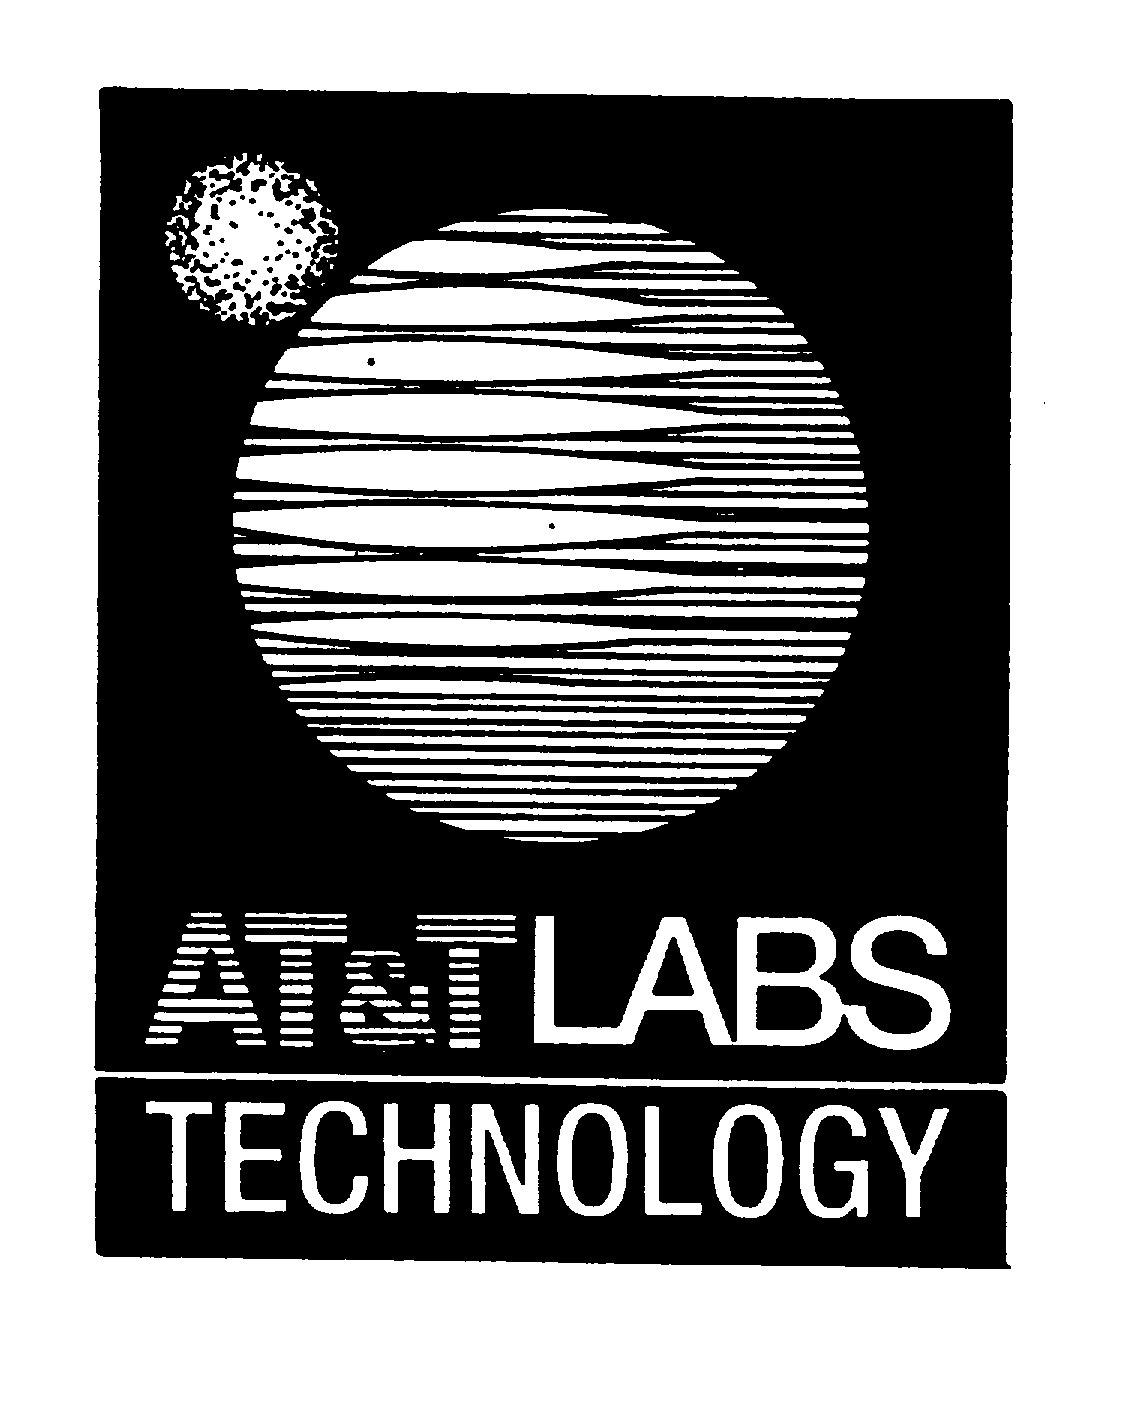  AT&amp;T LABS TECHNOLOGY